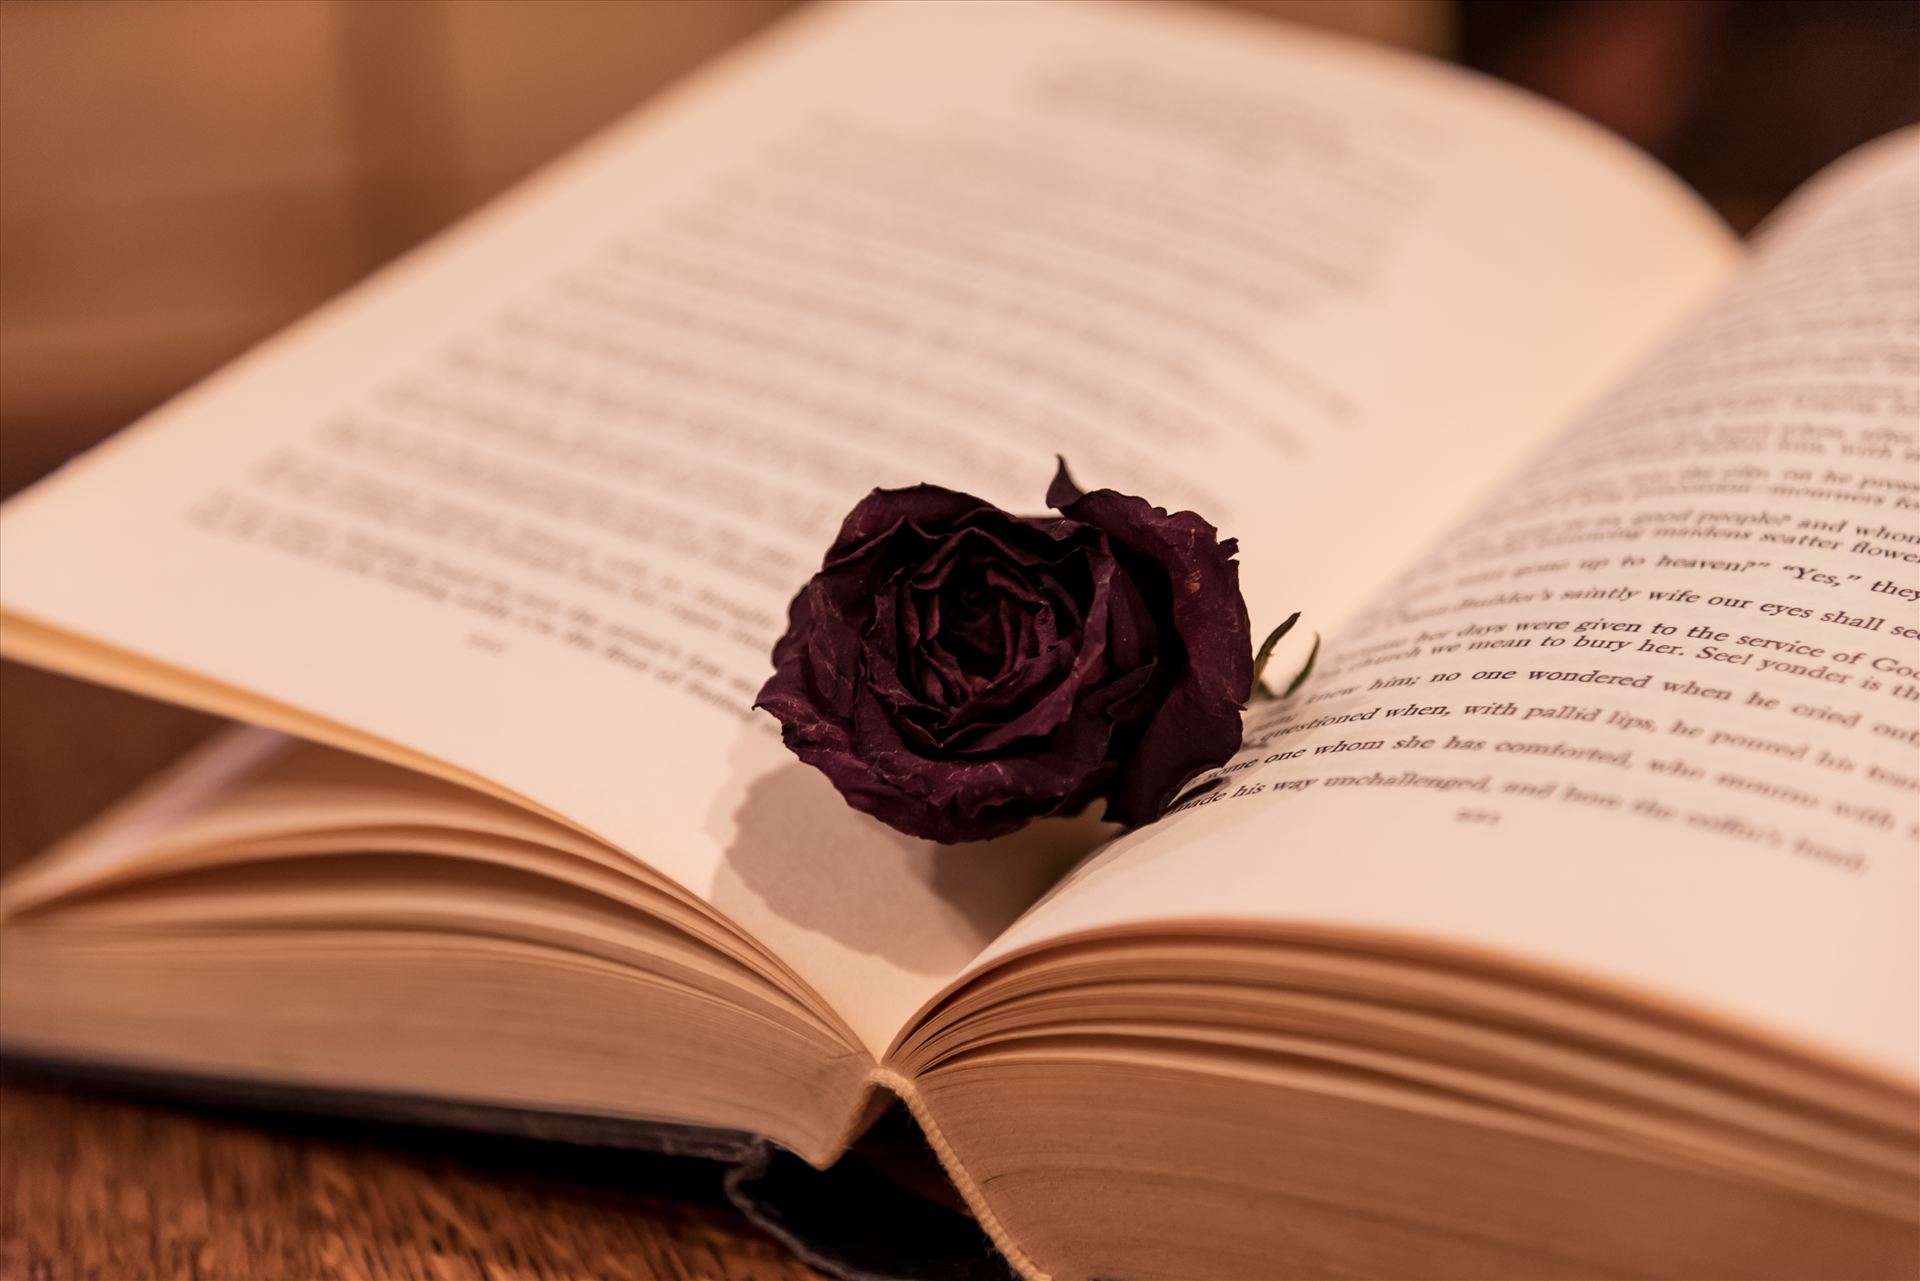 Black Rose in a Book.jpg - Dried rose in a book, brittle and beautiful by Sarah Williams